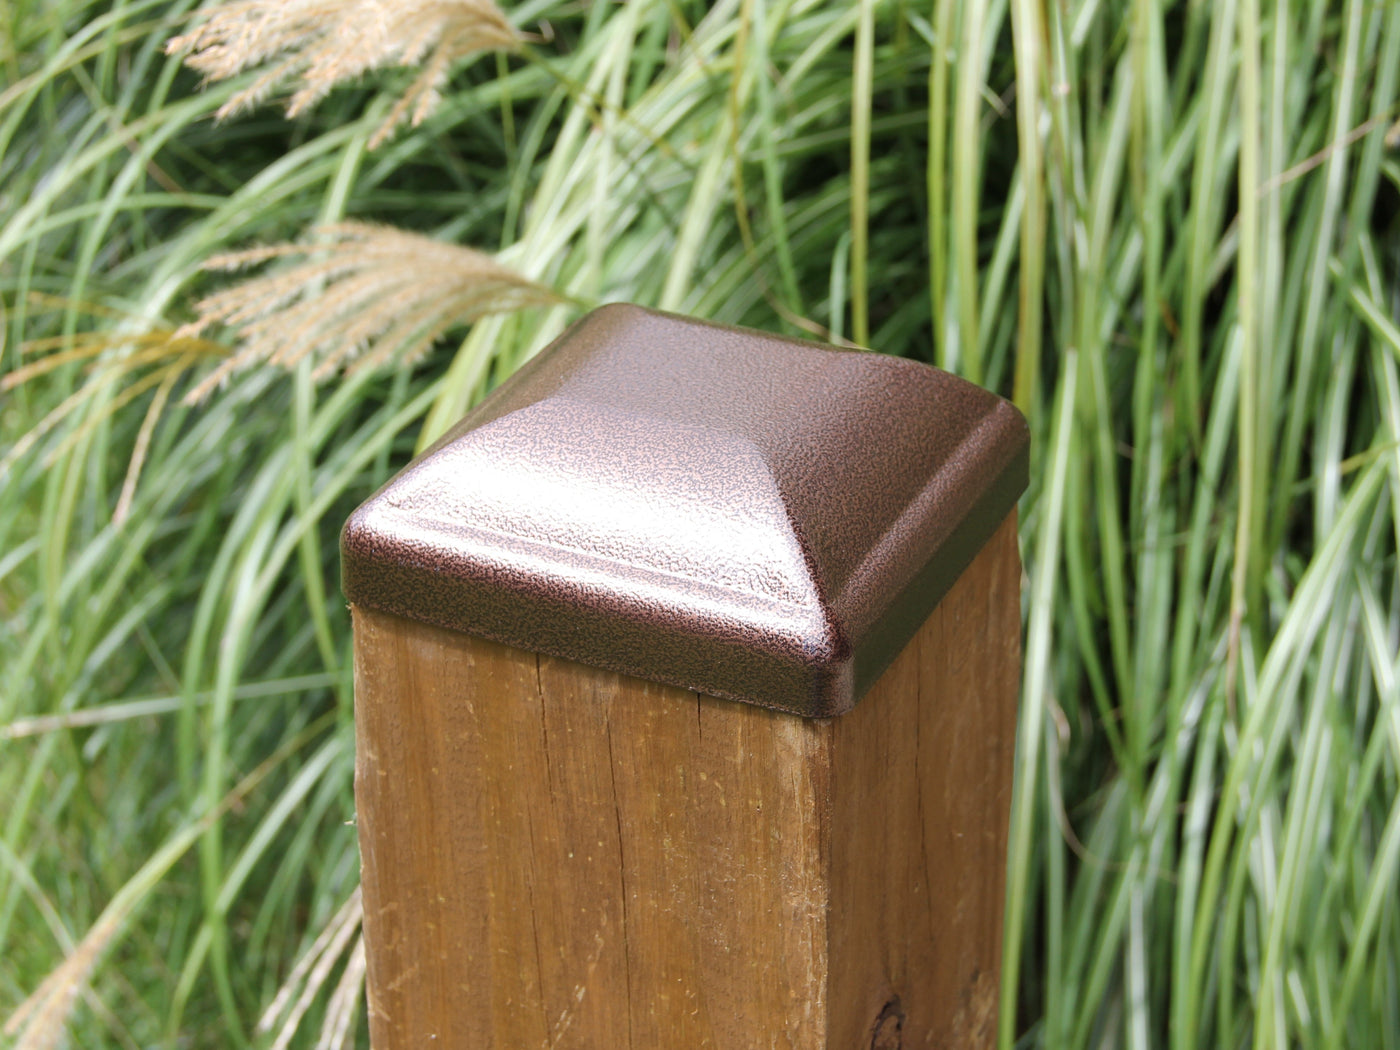 6x6 Heavy Duty Steel Post Cap - Madison Iron and Wood - Post Cap - metal outdoor decor - Steel deocrations - american made products - veteran owned business products - fencing decorations - fencing supplies - custom wall decorations - personalized wall signs - steel - decorative post caps - steel post caps - metal post caps - brackets - structural brackets - home improvement - easter - easter decorations - easter gift - easter yard decor